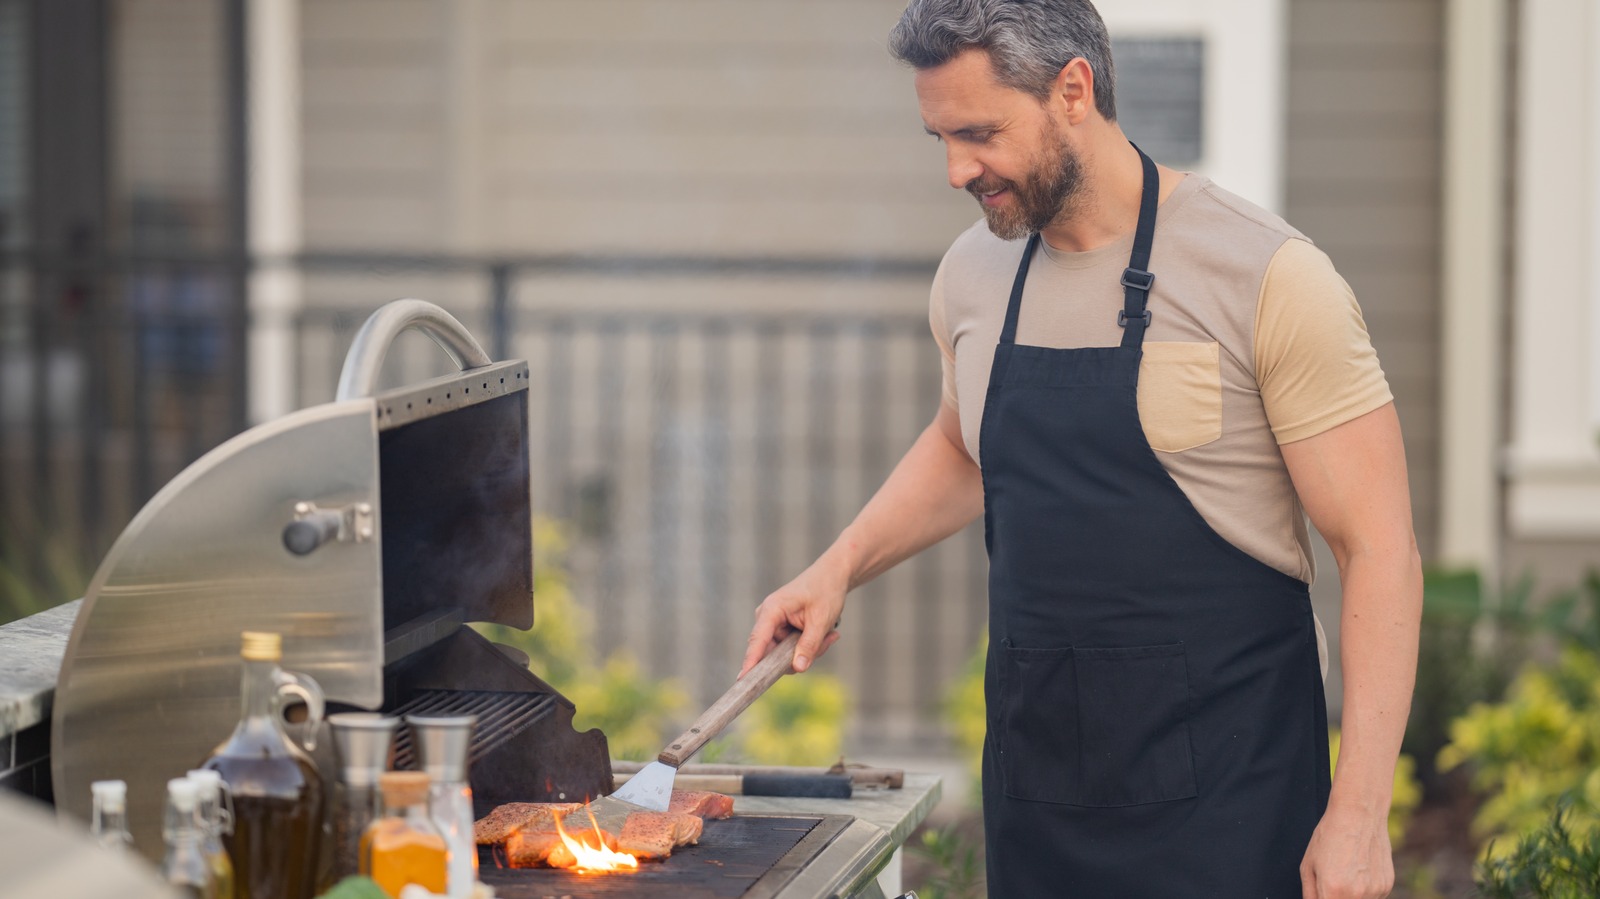 The grill mistake that significantly extends cooking time